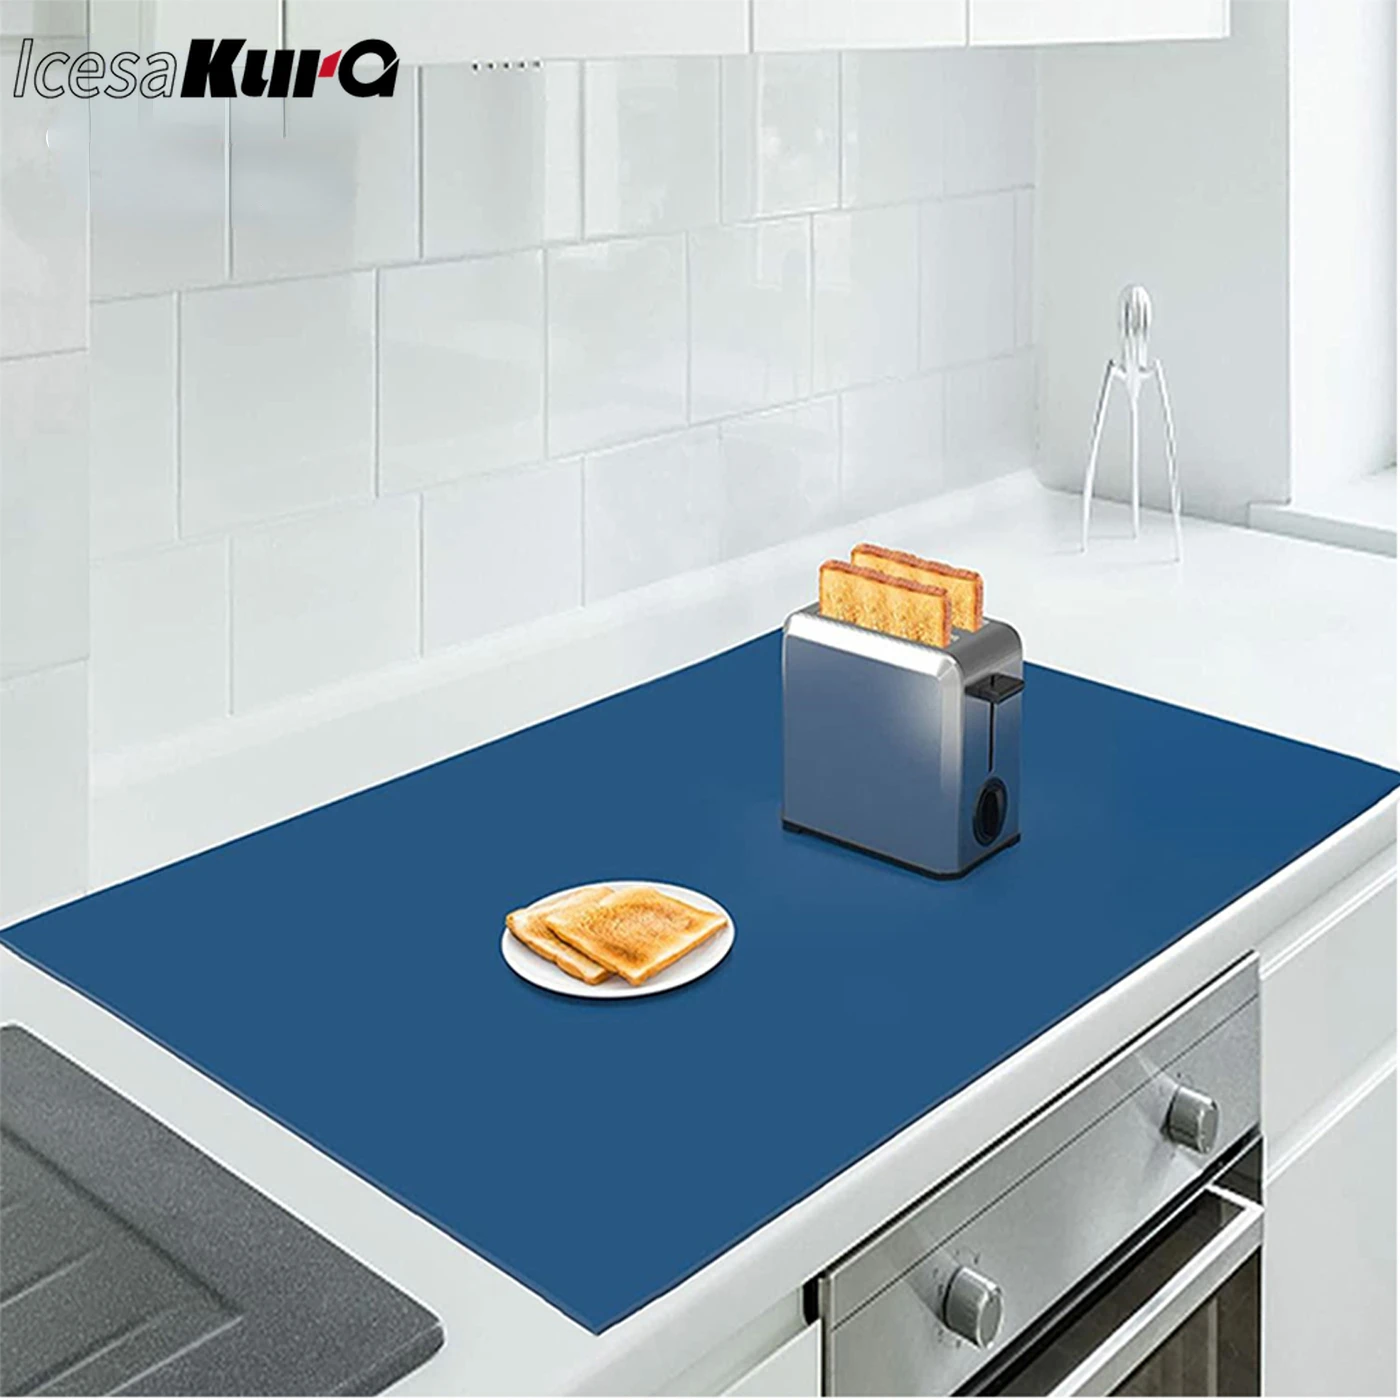 

Extra Large Silicone Mat Heat Resistant Sheet Waterproof Pad Kitchen Counter Protector Vinyl Craft Mats Nonslip Table Placemat